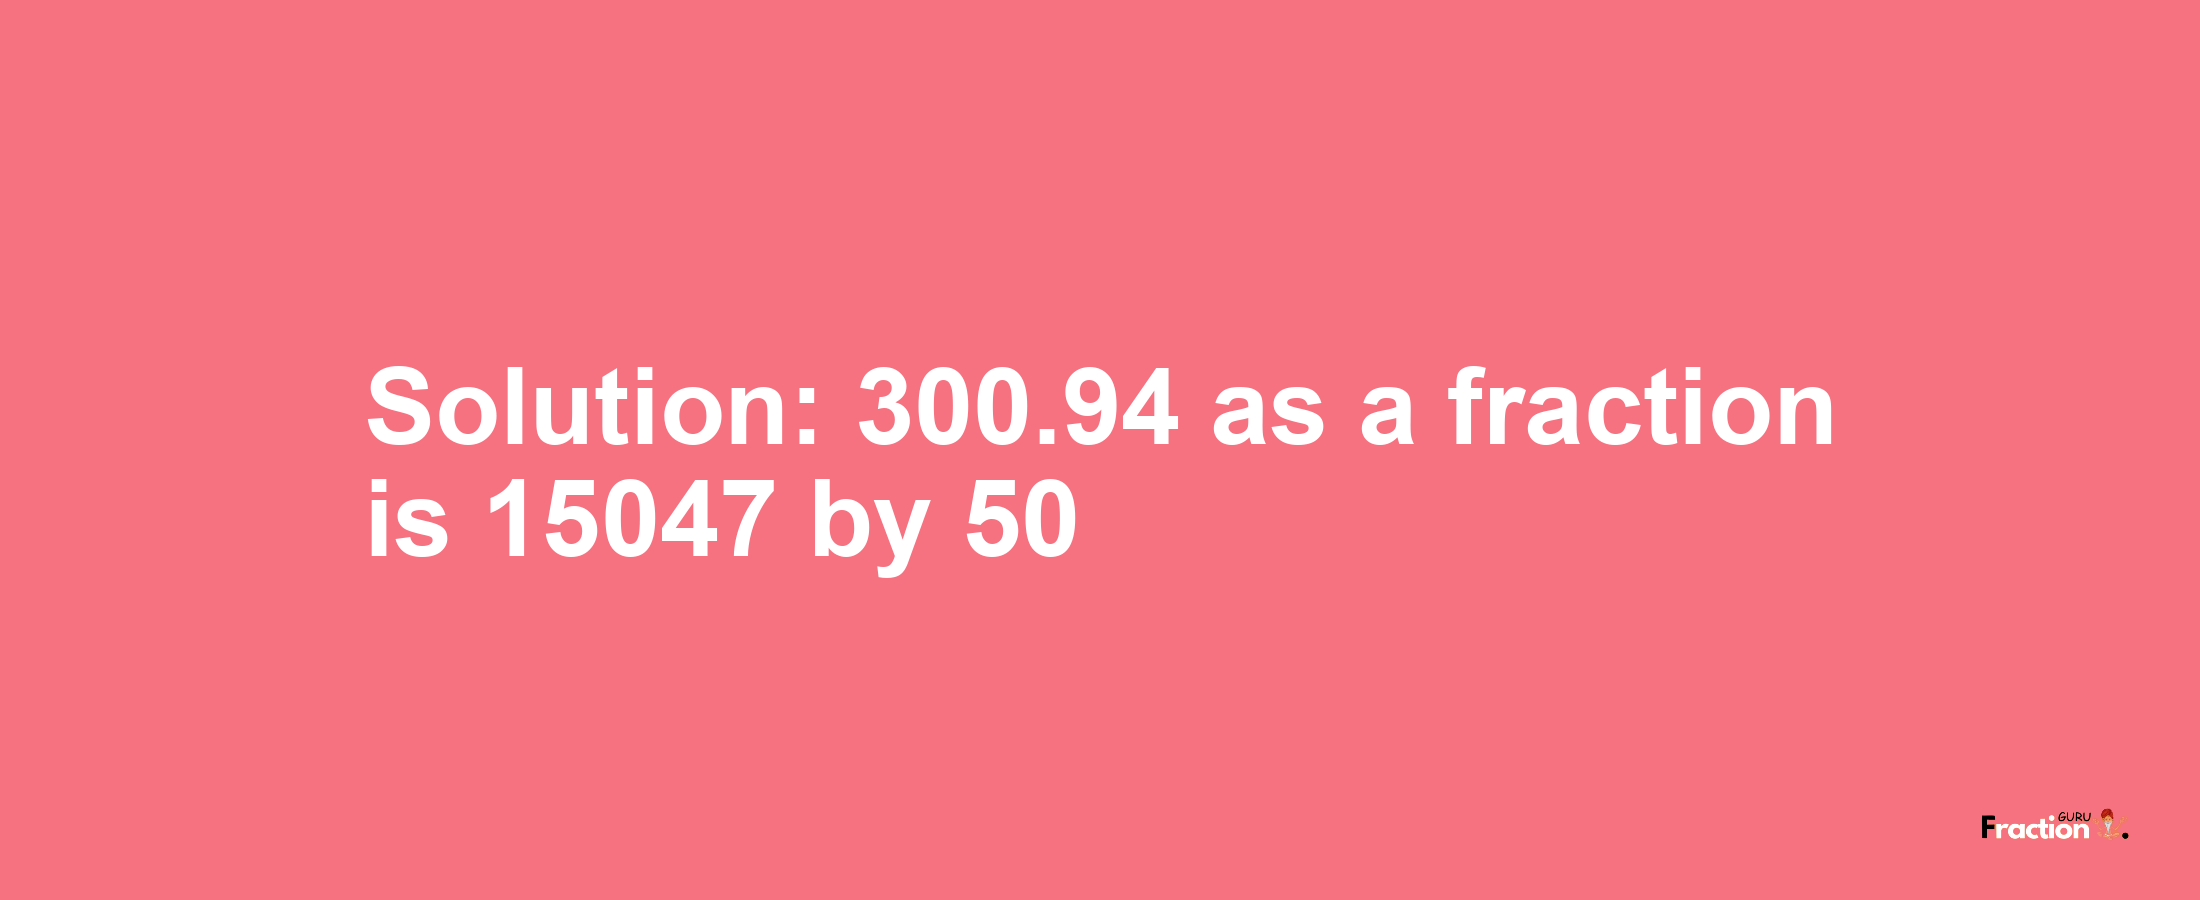 Solution:300.94 as a fraction is 15047/50